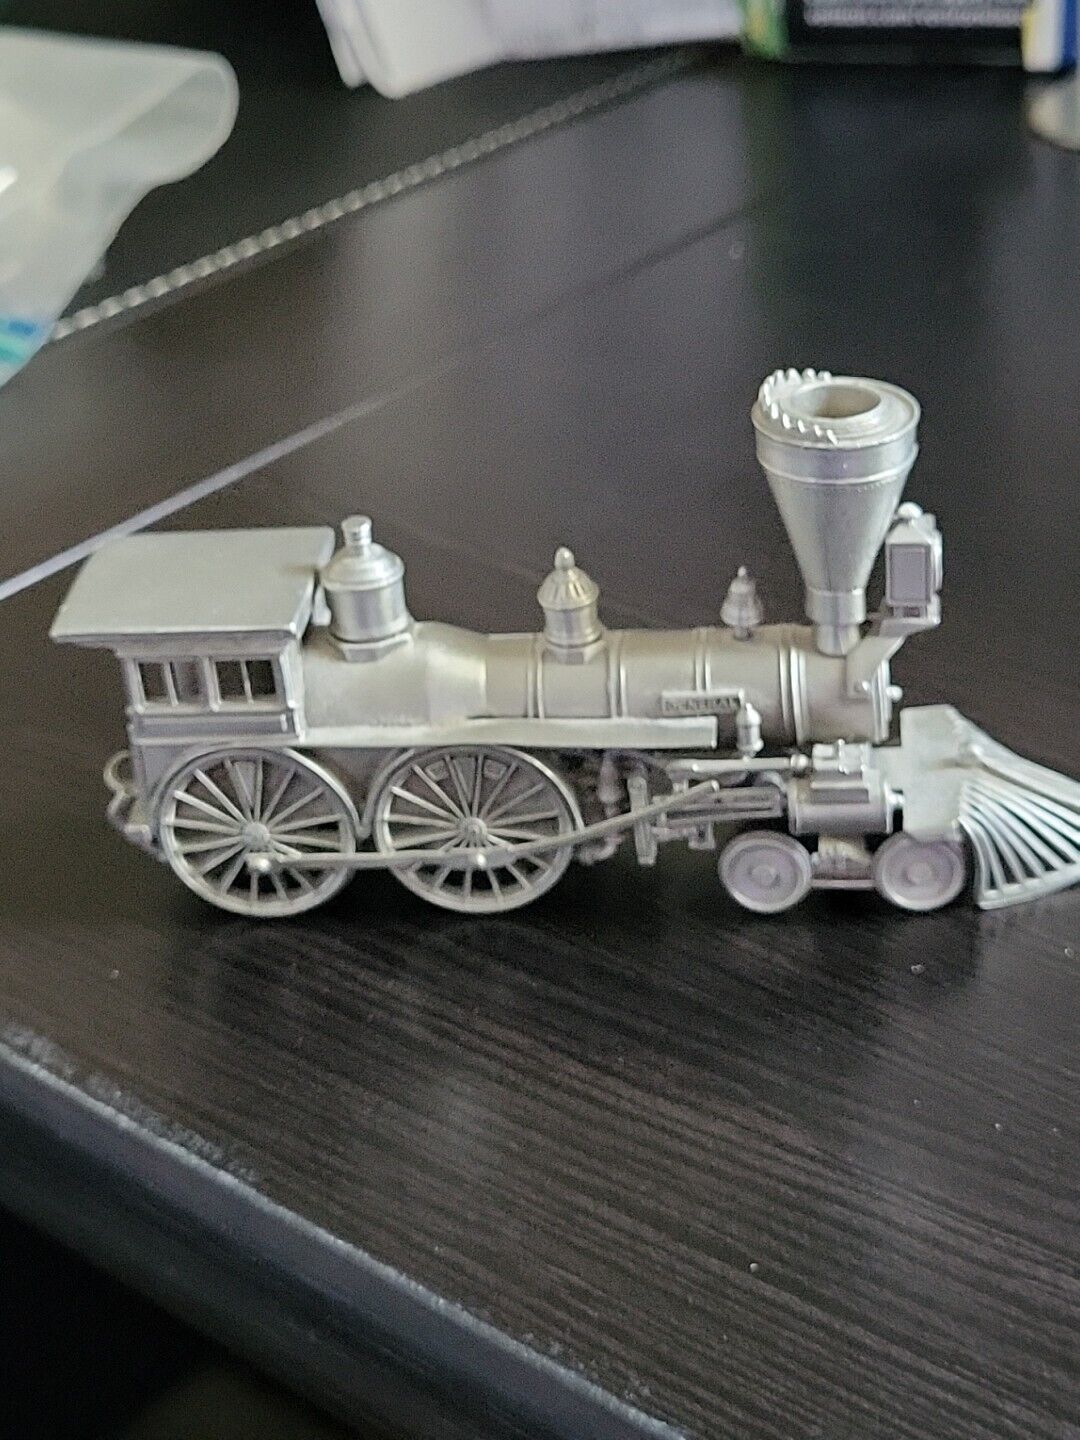 4 Vintage Locomotives from The DANBURY Mint. Pewter. Price Is For All 4 Pictured